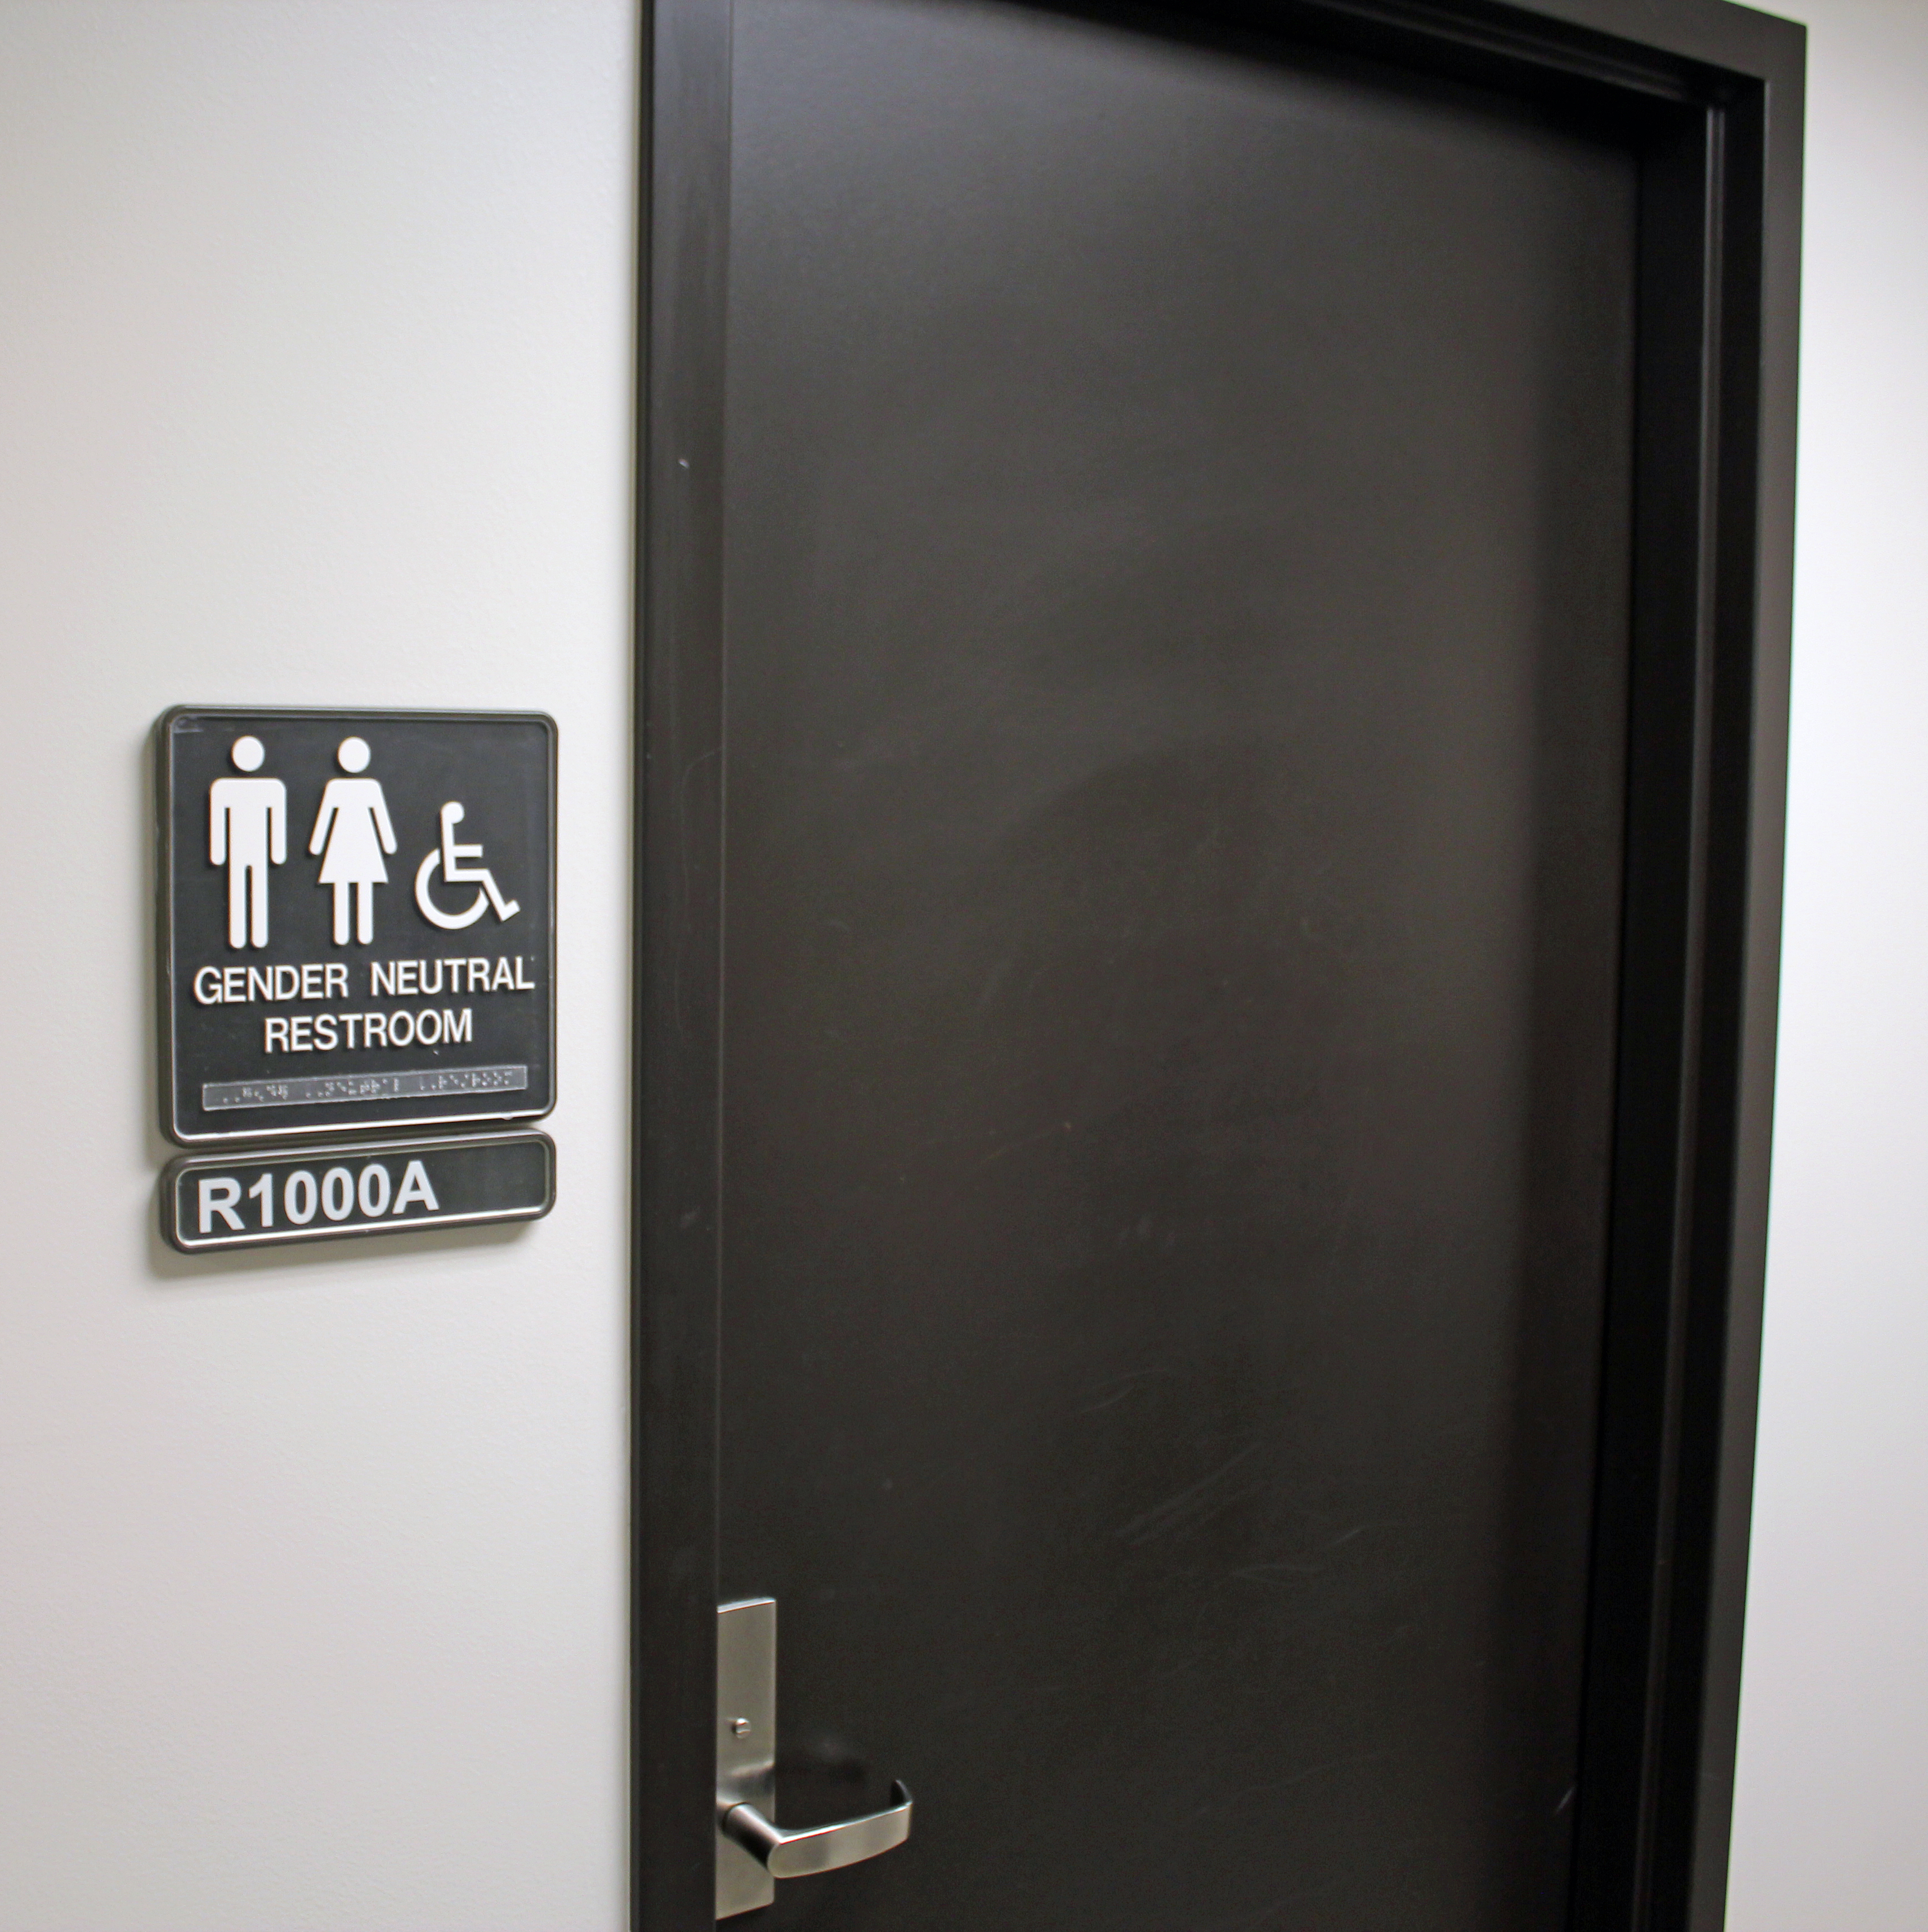 The Reviling Fight Against Gender Neutral Bathrooms